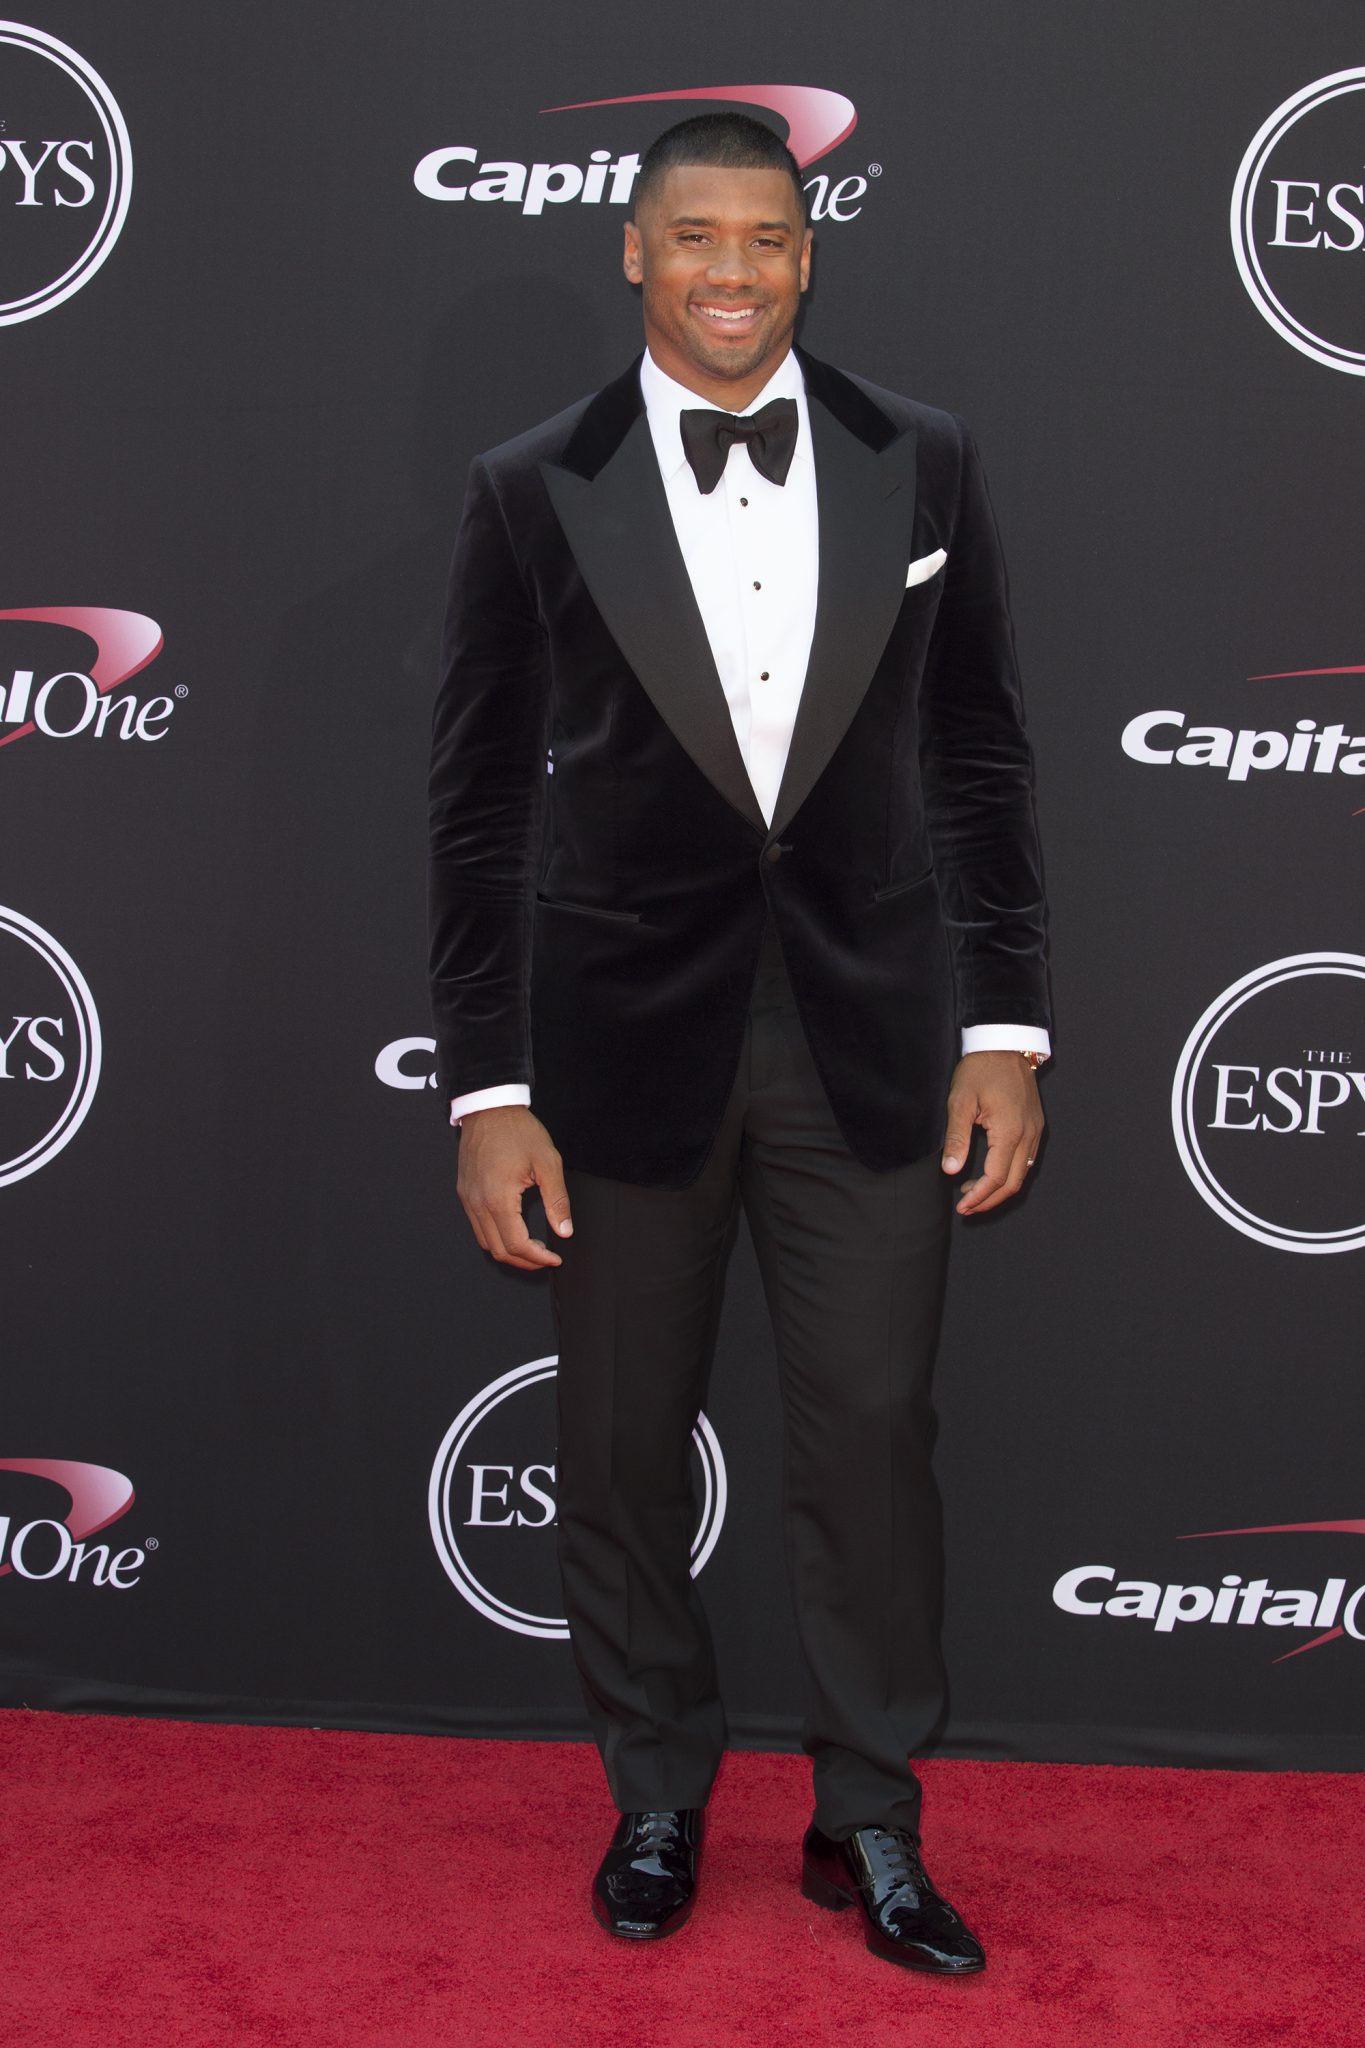 Red Carpet Arrivals: 25th Annual ESPYS Awards - Talking With Tami